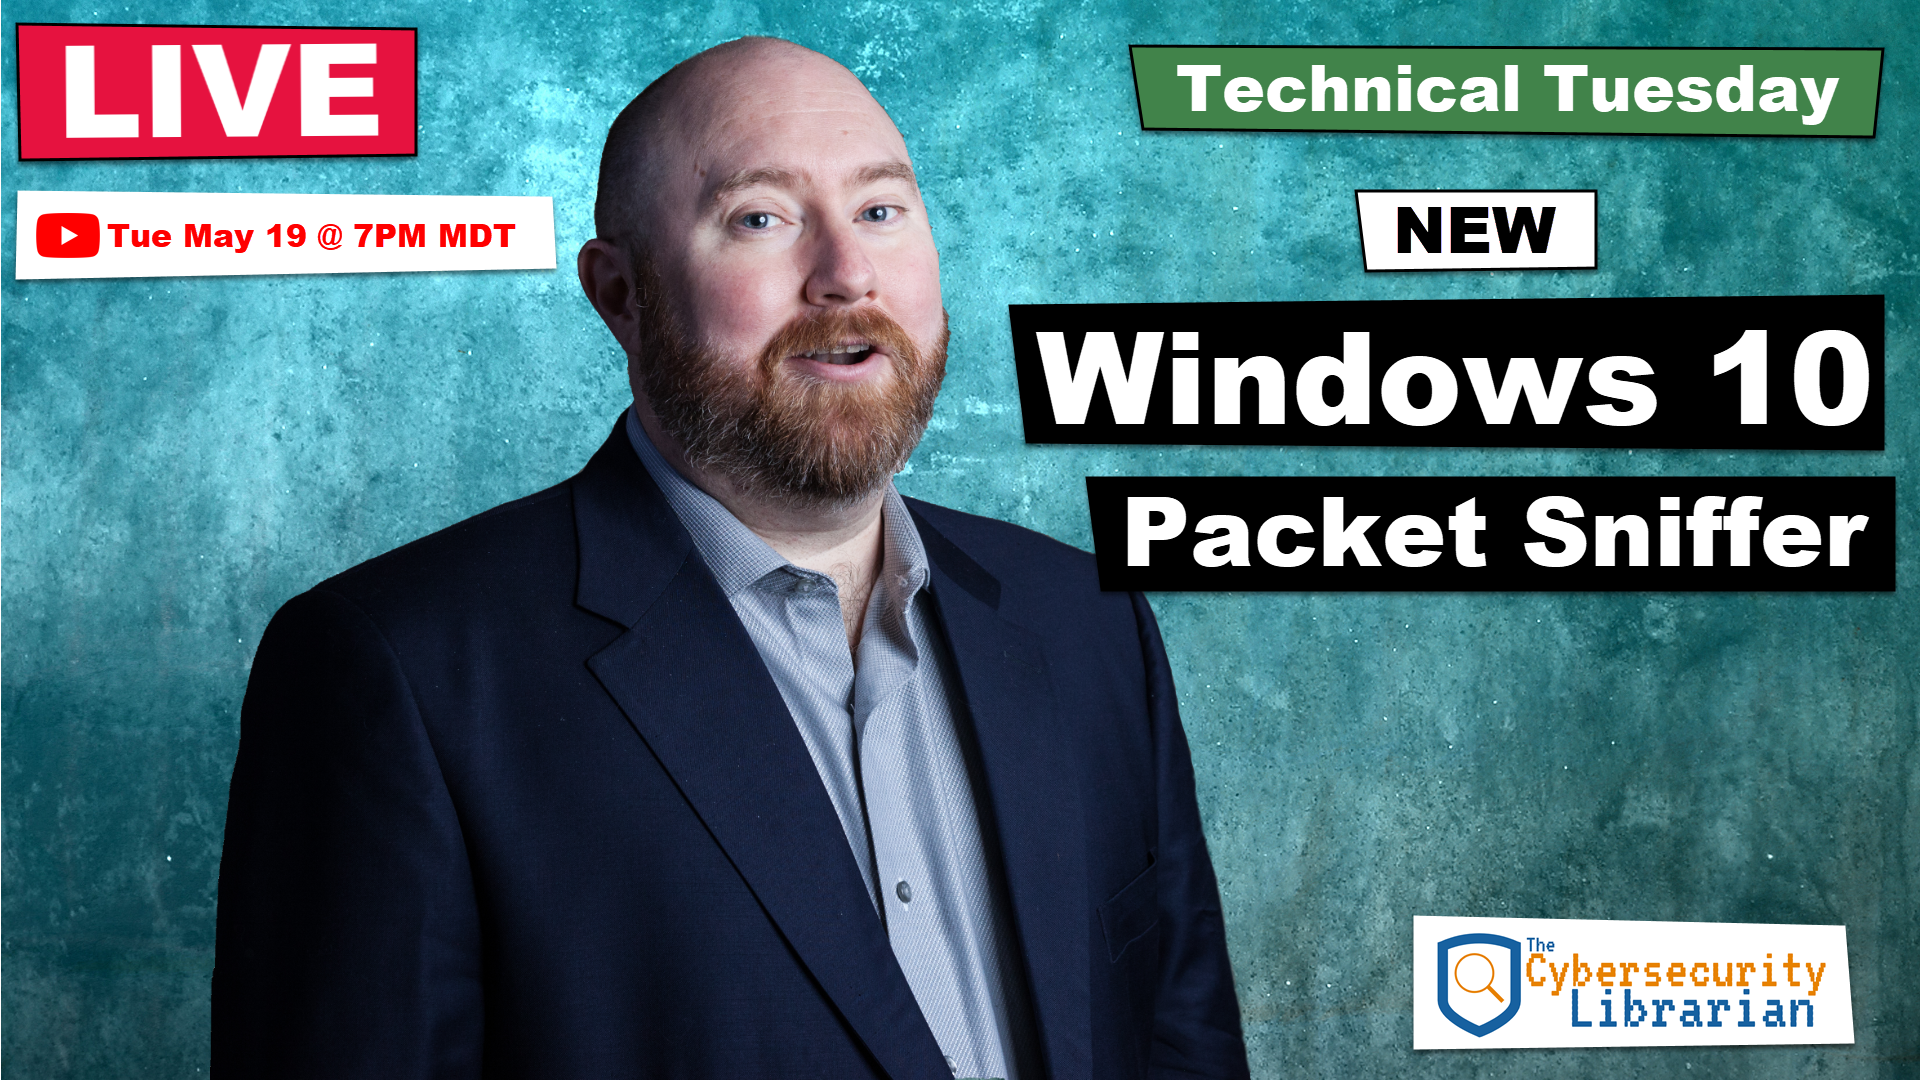 thumbnail for NEW Windows 10 Packet Sniffer youtube video